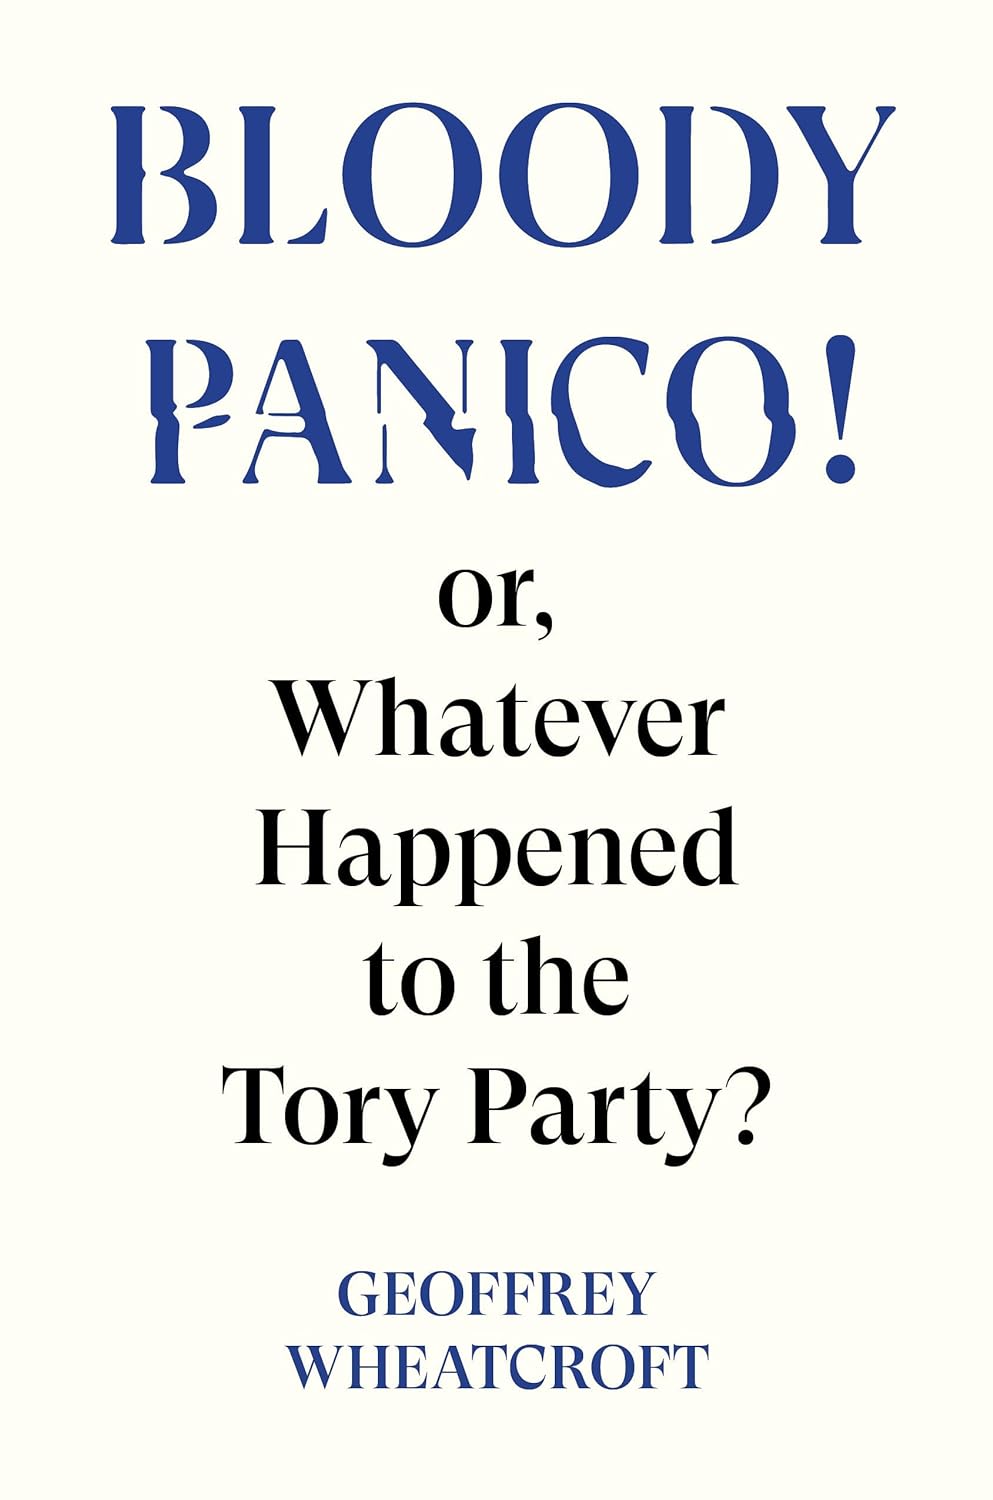 Bloody_Panico_or_what_ever_happened_to_the_tory_party_book_cover.jpg